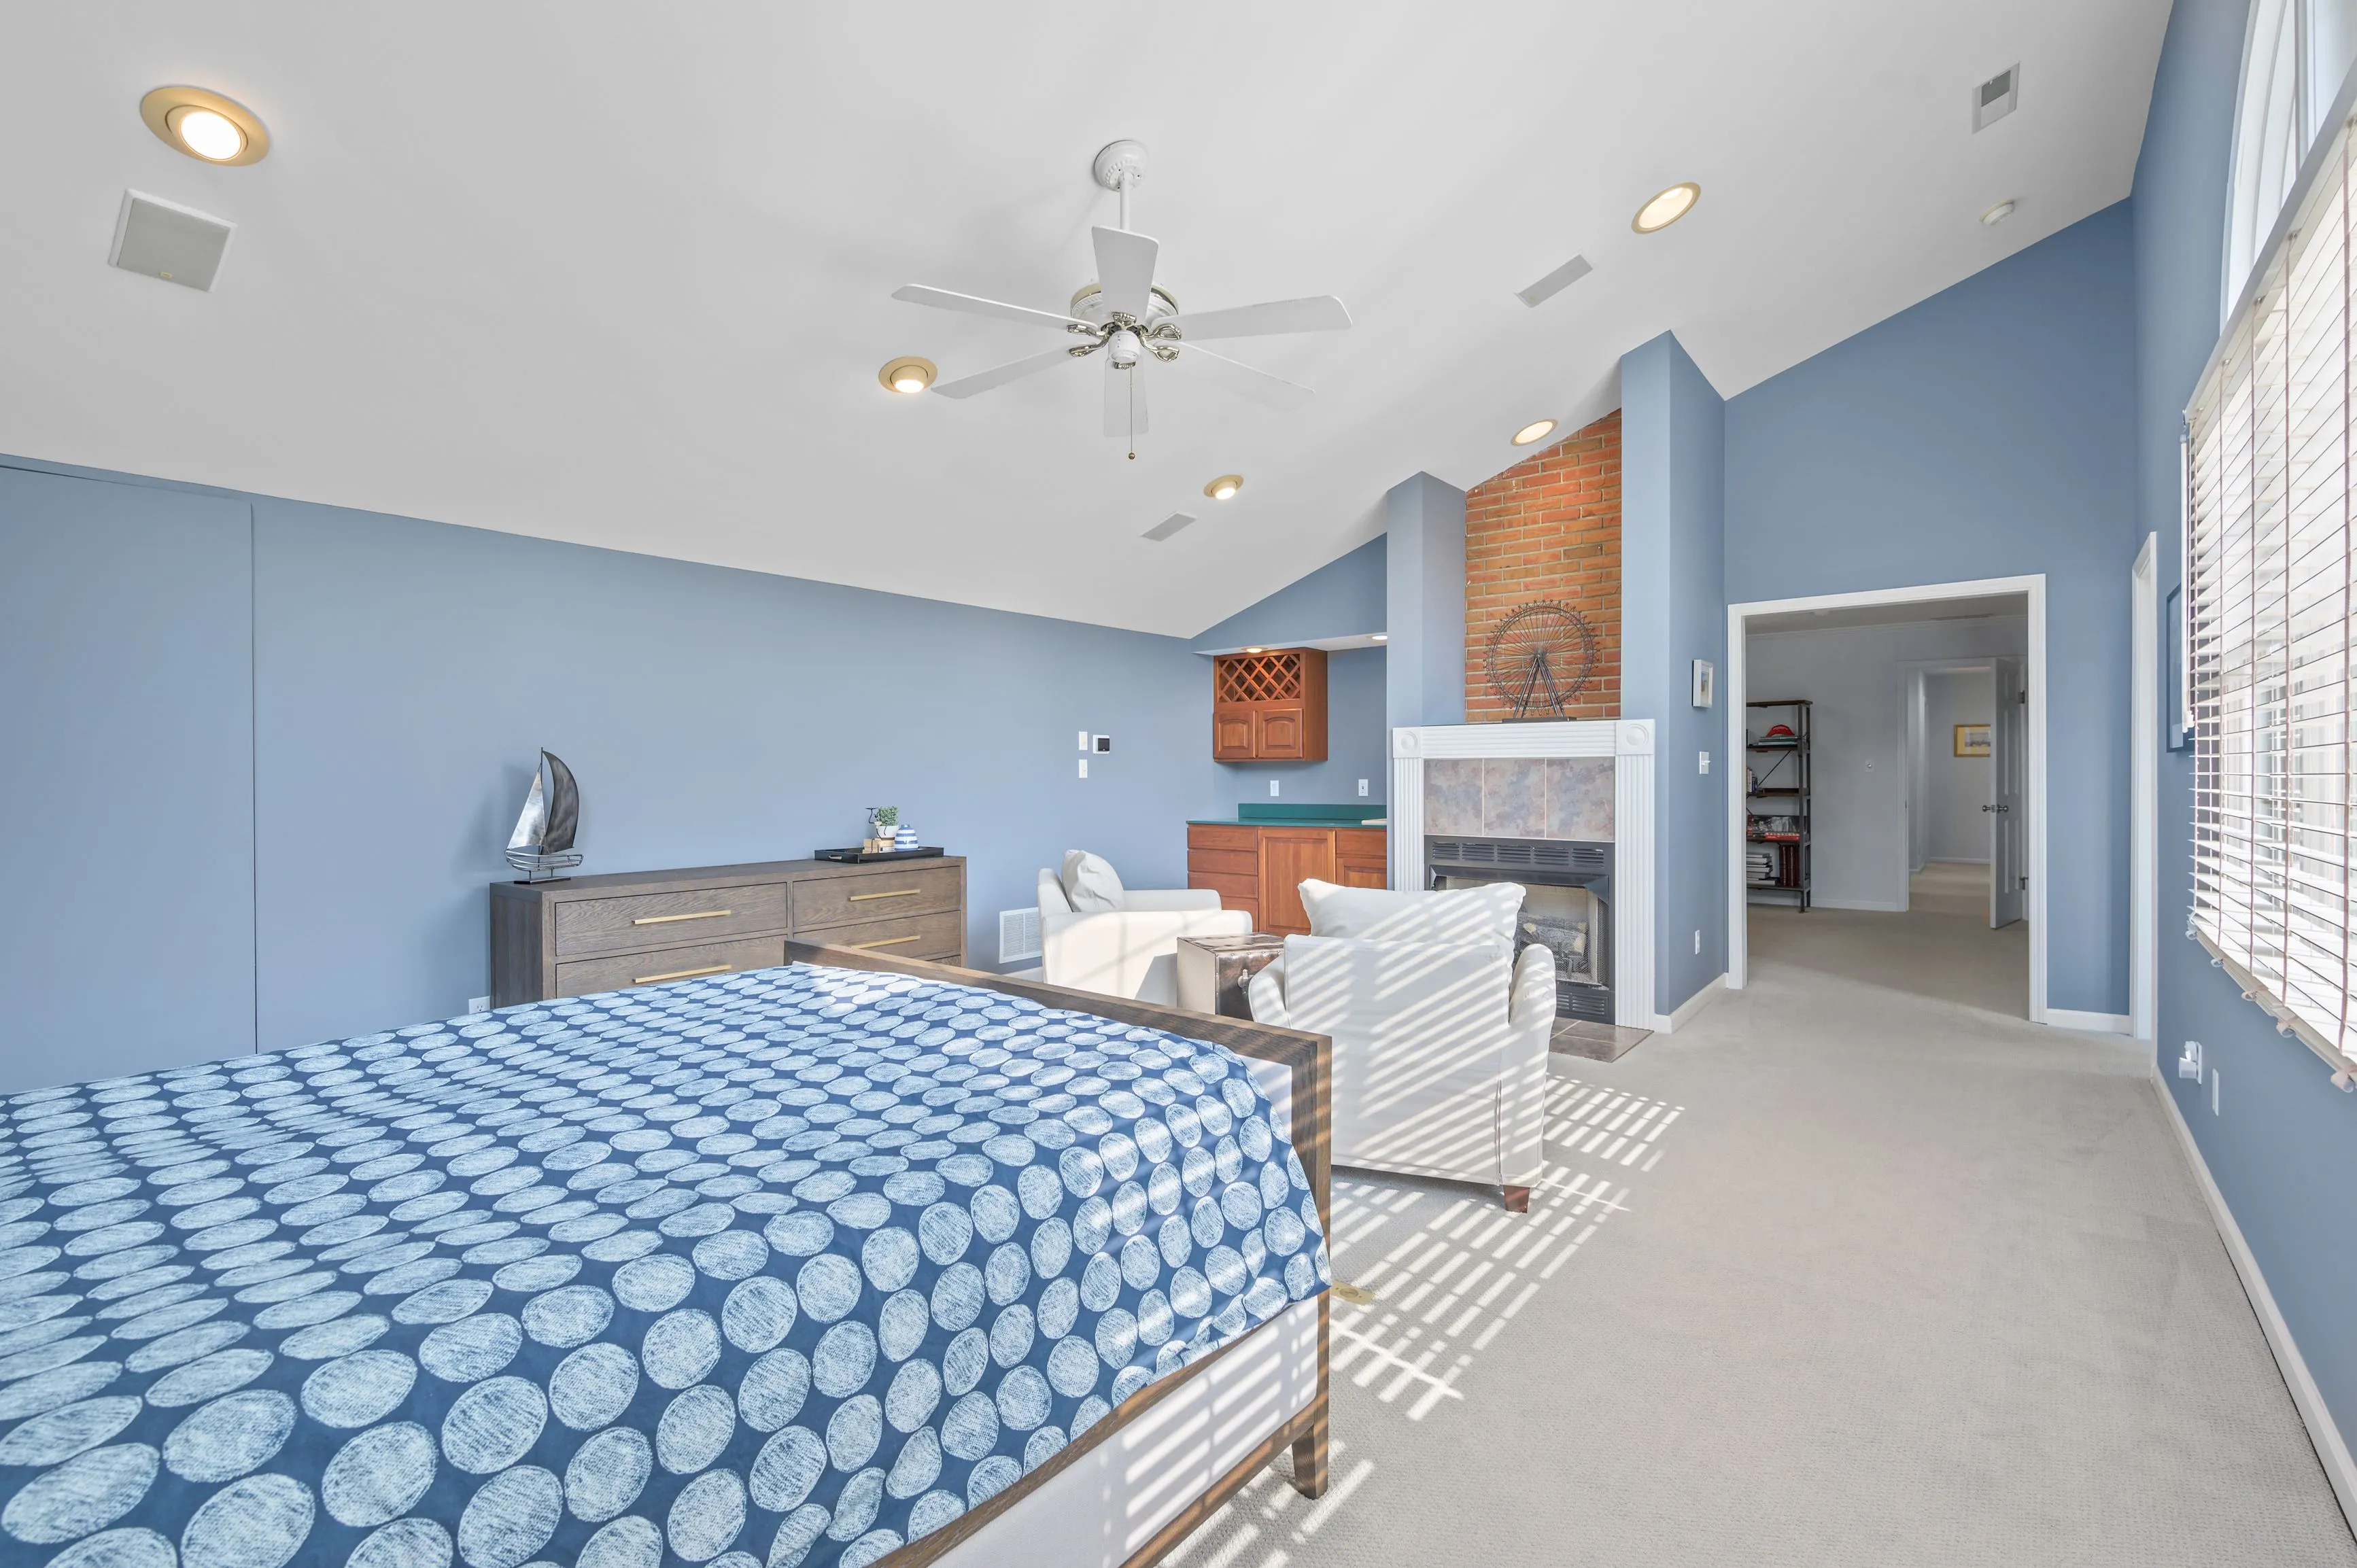 Spacious bedroom with blue walls, a patterned bedspread, ceiling fan, and an ensuite bathroom entrance.